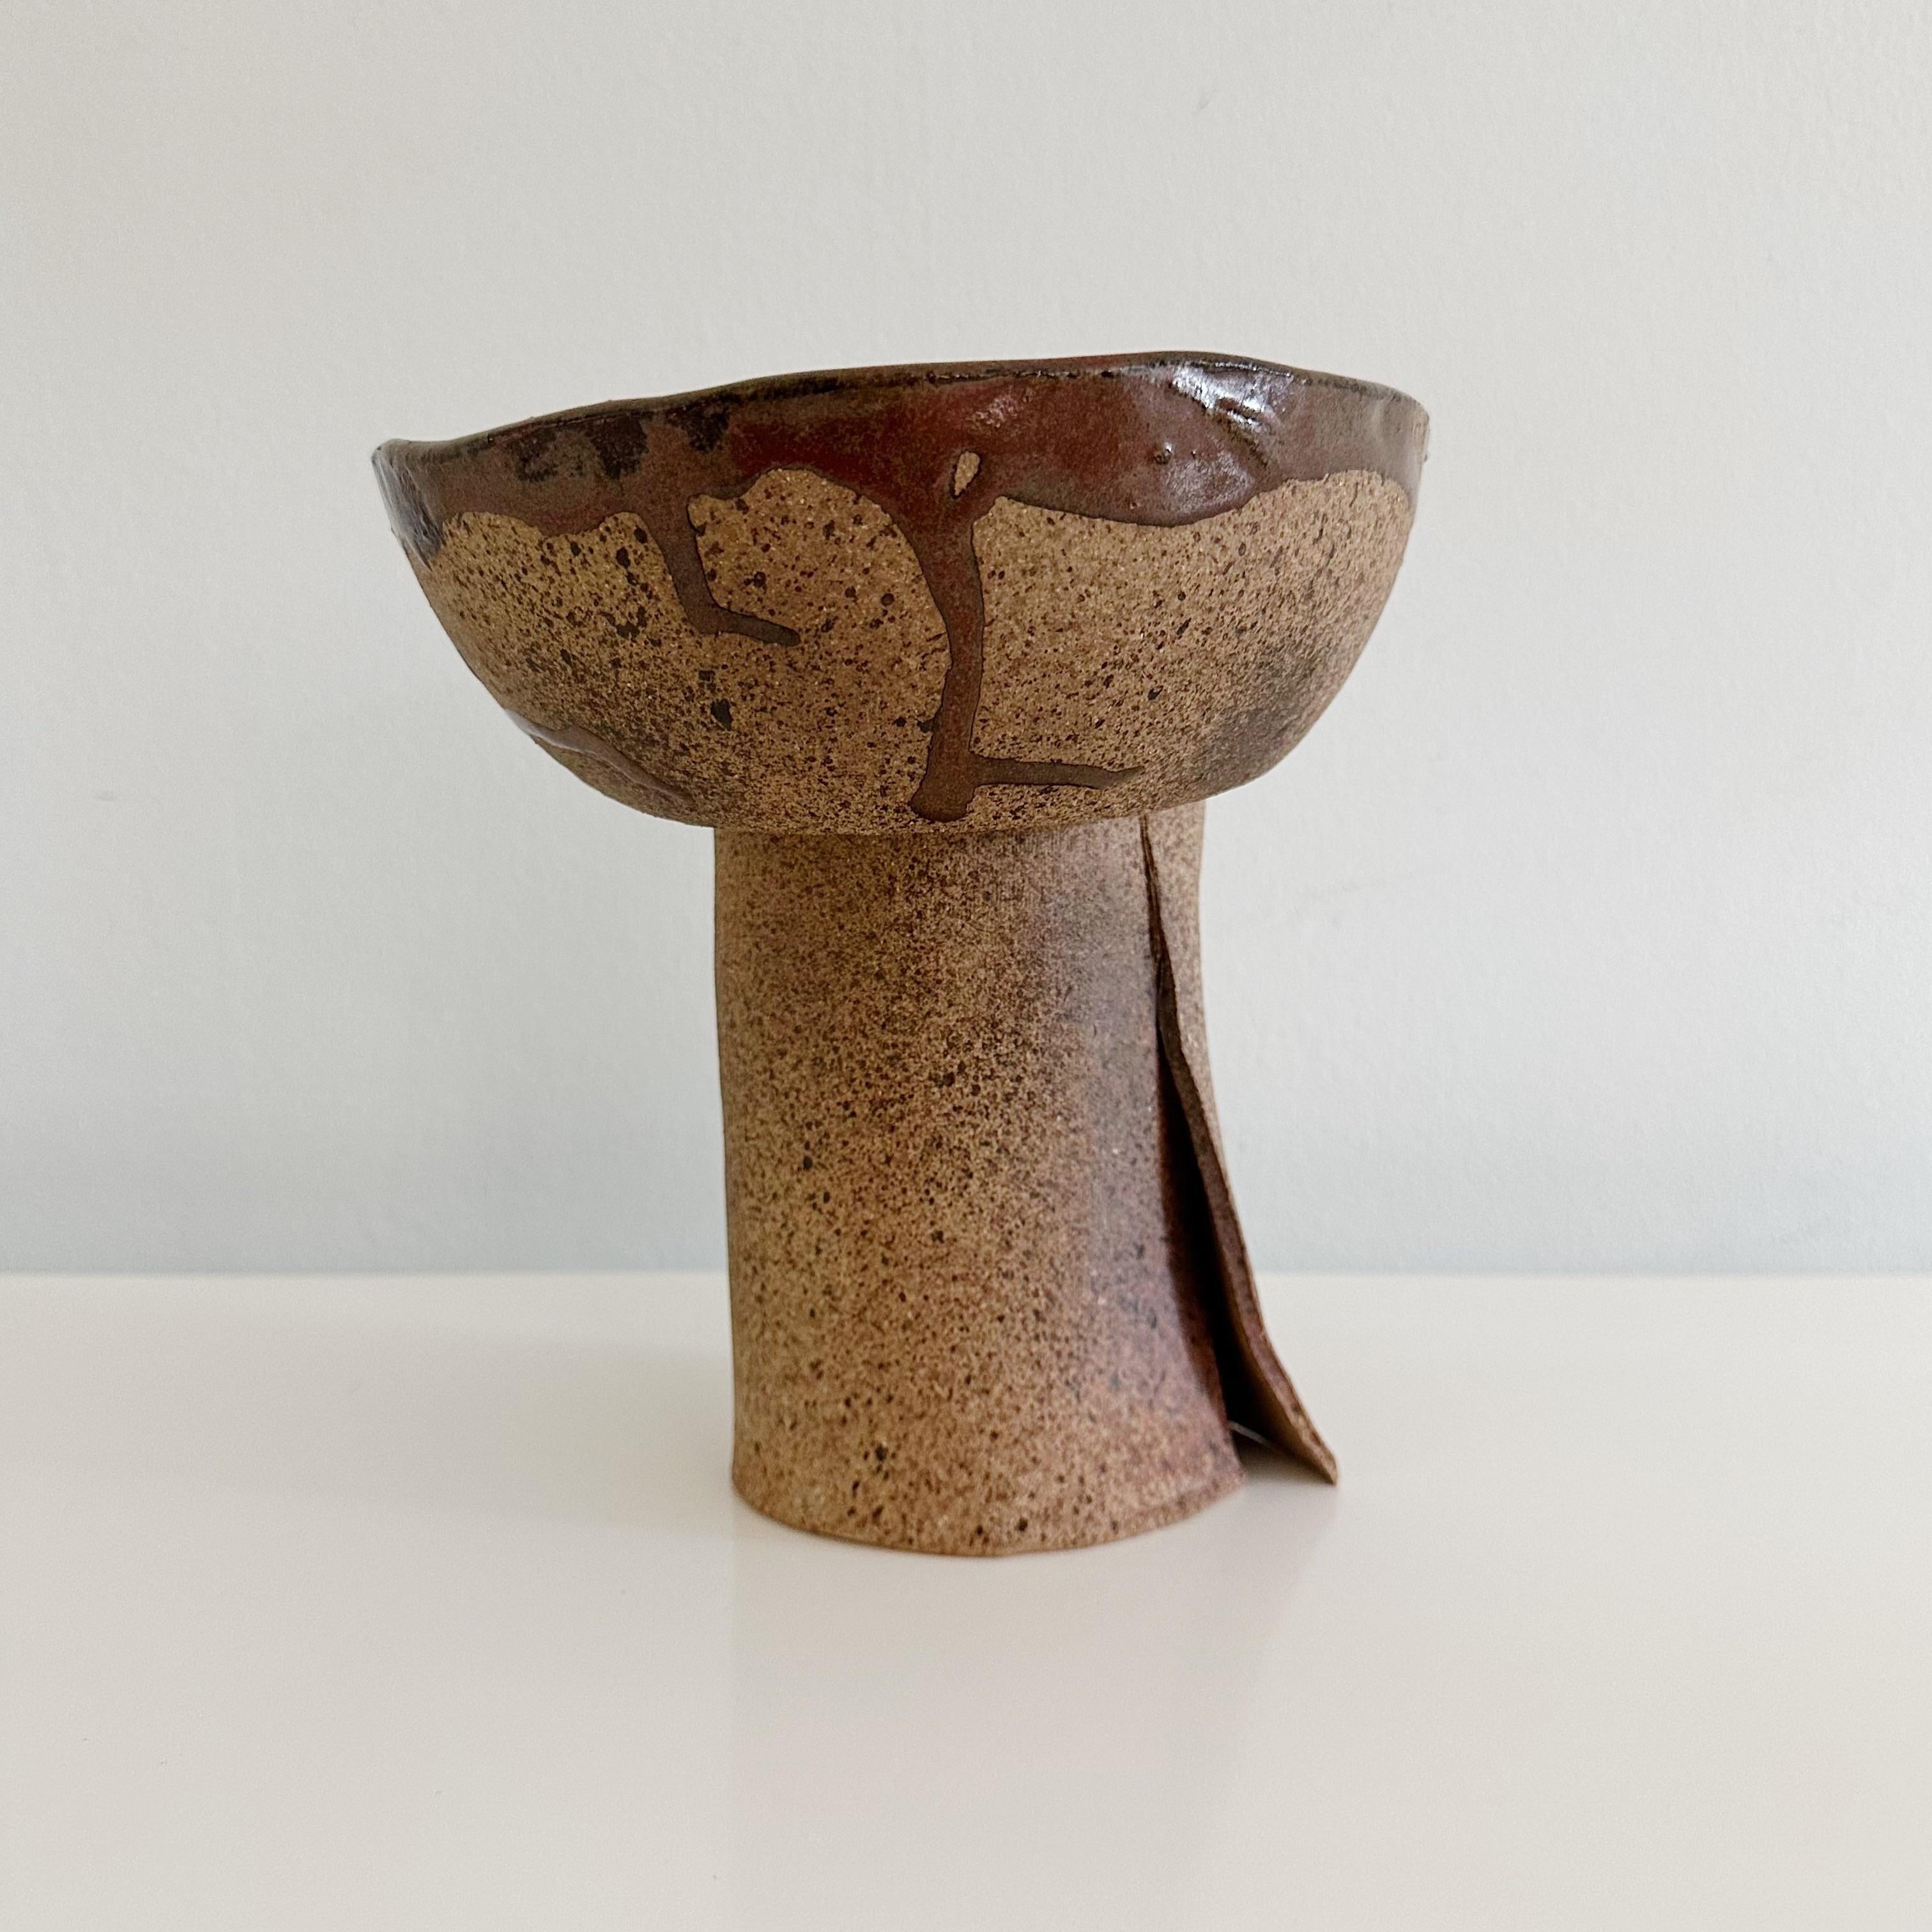 Abstract Vintage Studio Pottery Organic Sculptural Bowl by Ruth Joffa (1920-2017)

A unique studio pottery bowl, glazed on the inside unglazed on the outside. Created by the renowned sculptor Ruth Joffa. This particular signed piece, comes with a